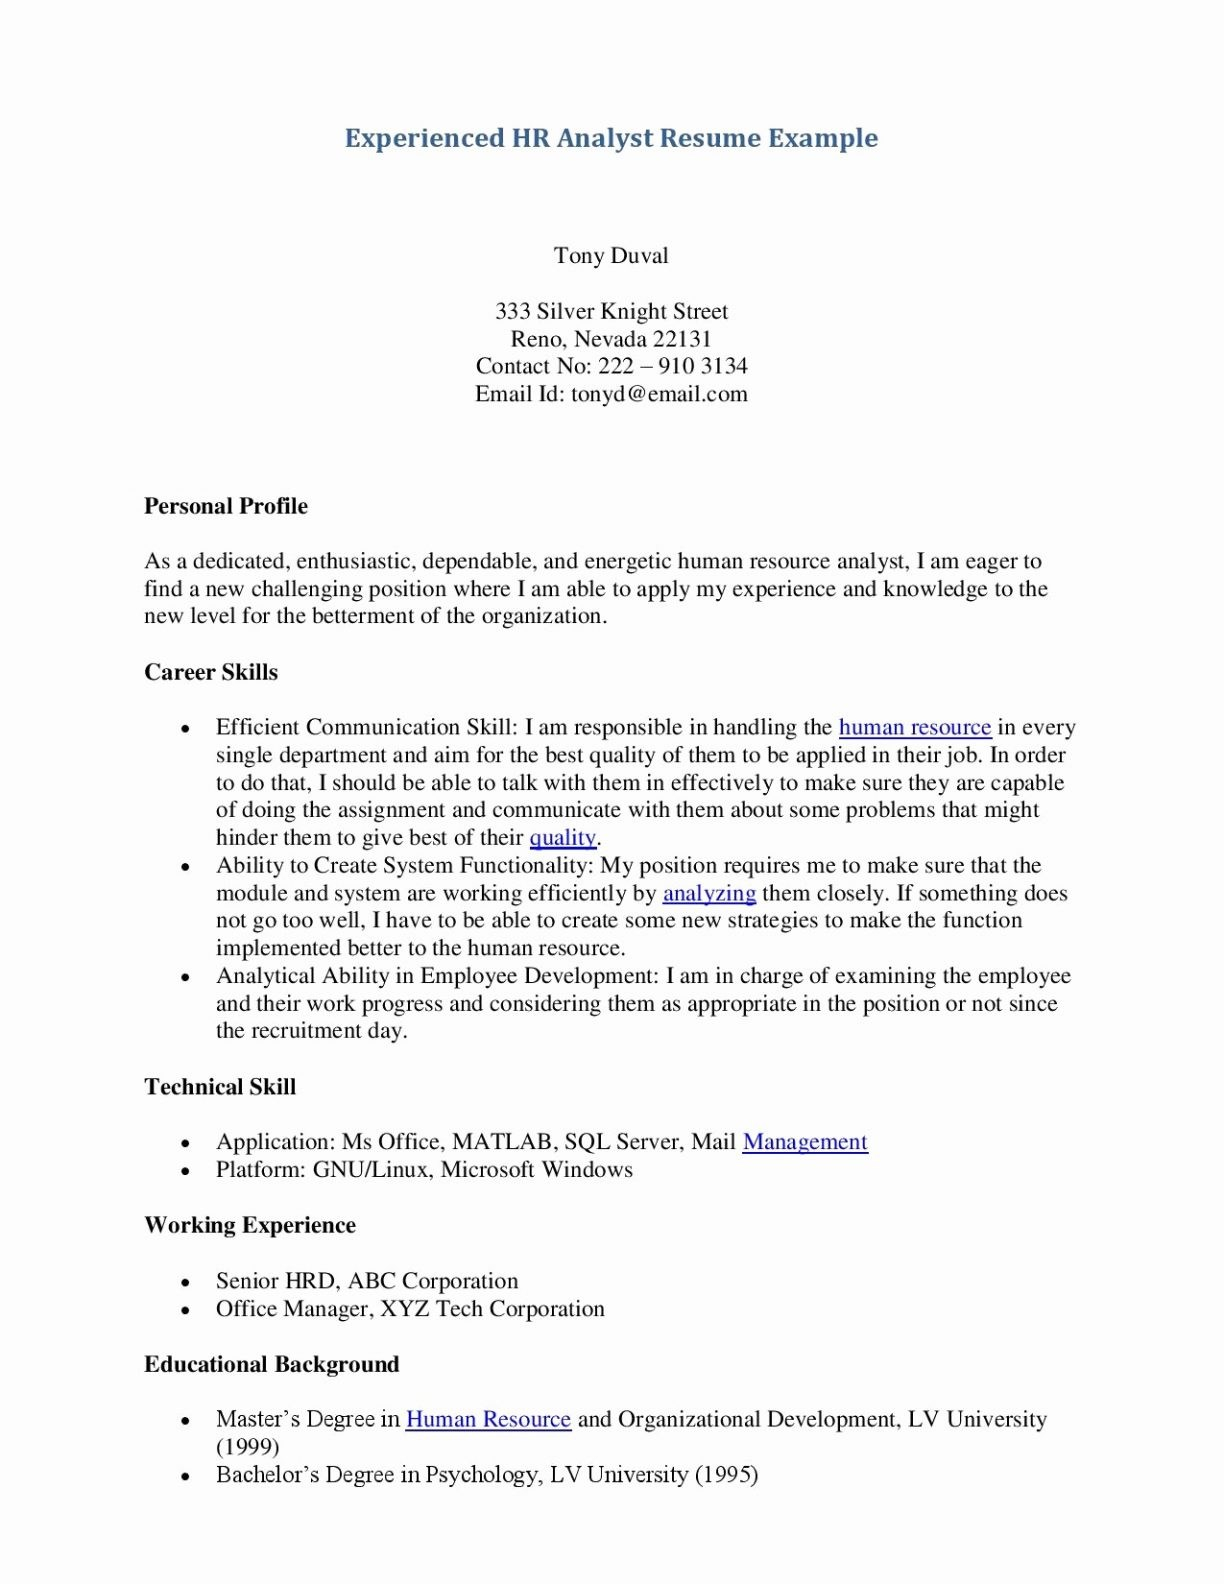 Email Letter Template - Cover Letter Template Google Docs Unique Resume Cover Letter